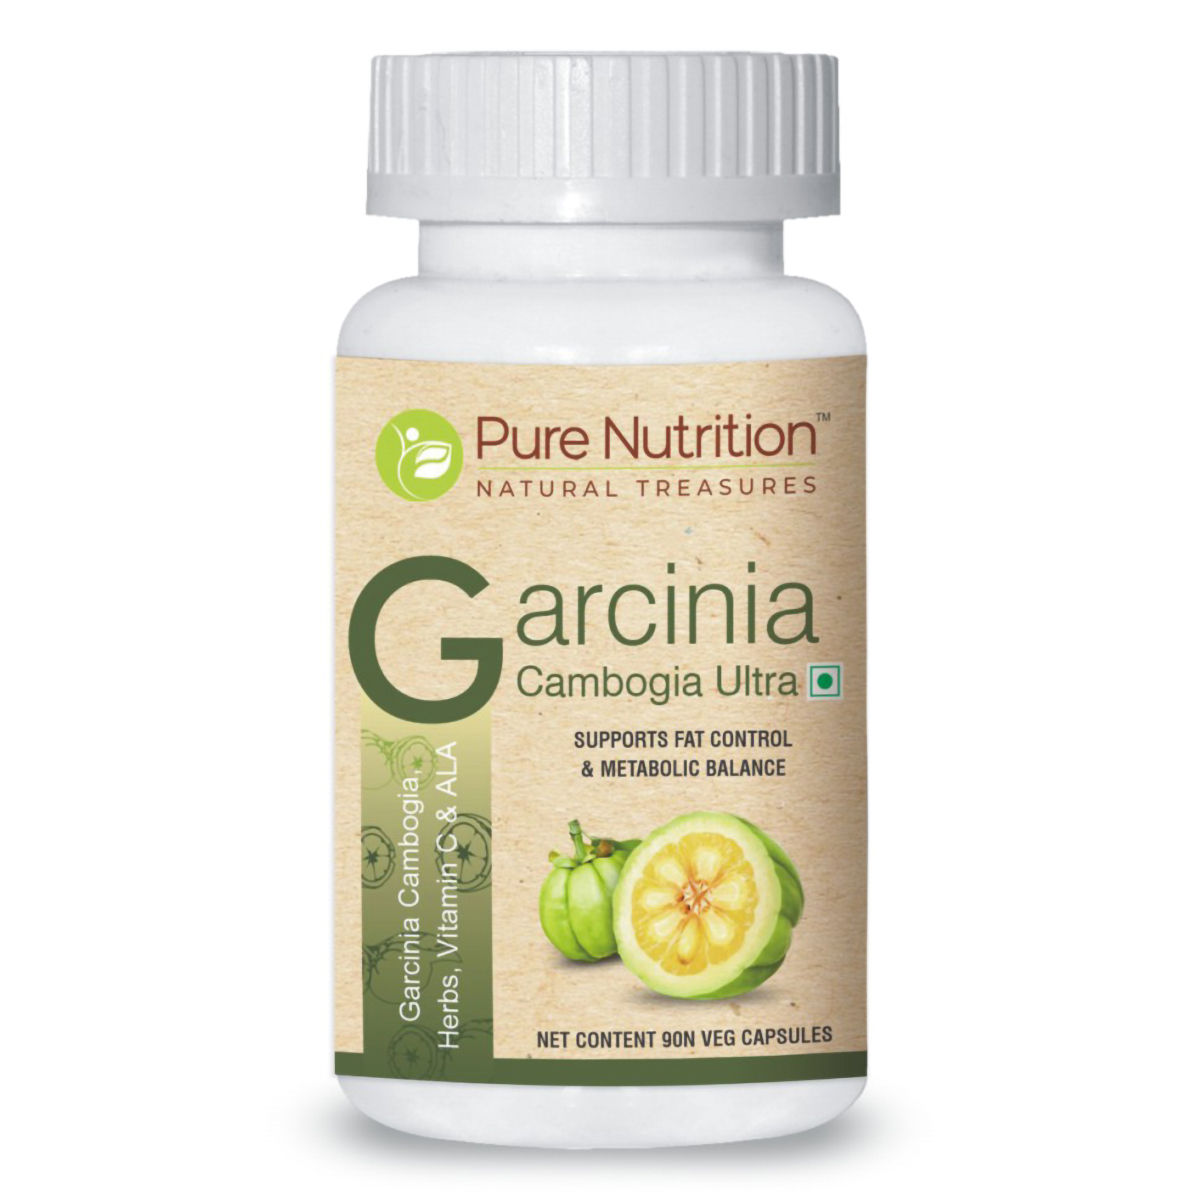 Buy Pure Nutrition Garcinia Cambogia Ultra 875 mg, 90 Capsules Online